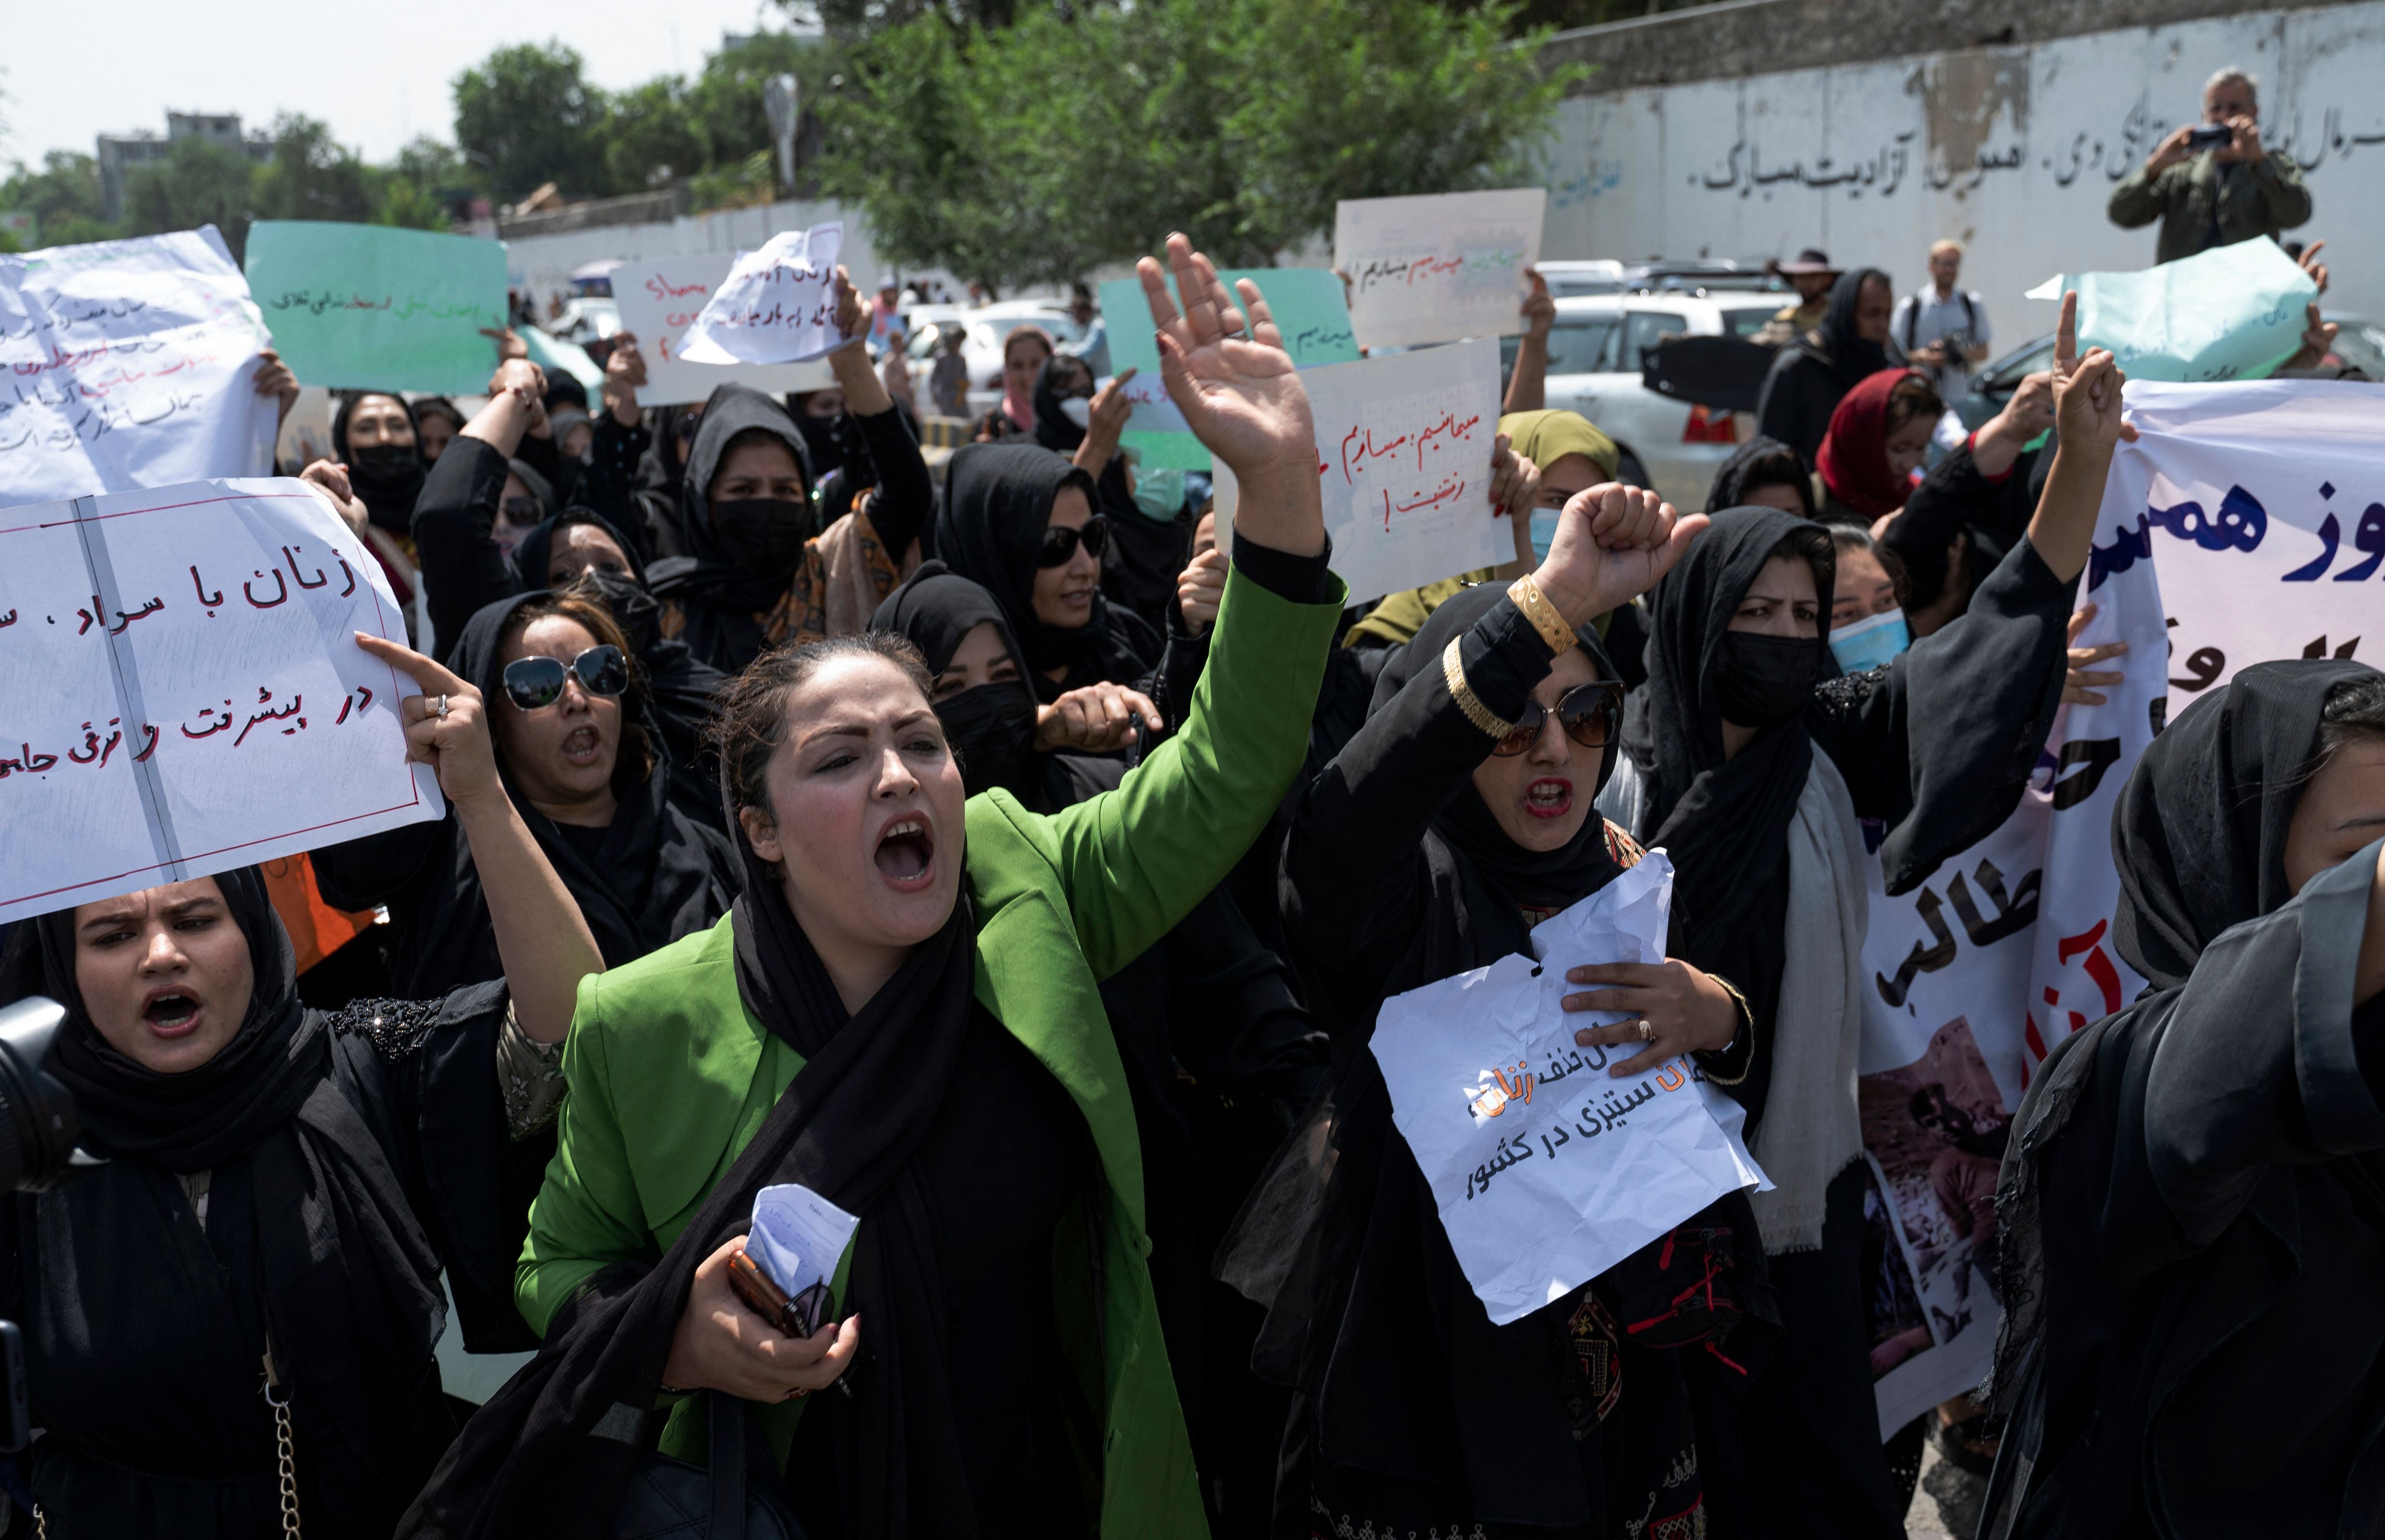 Afghan women hold placards during a women’s rights protest in Kabul on 13 August